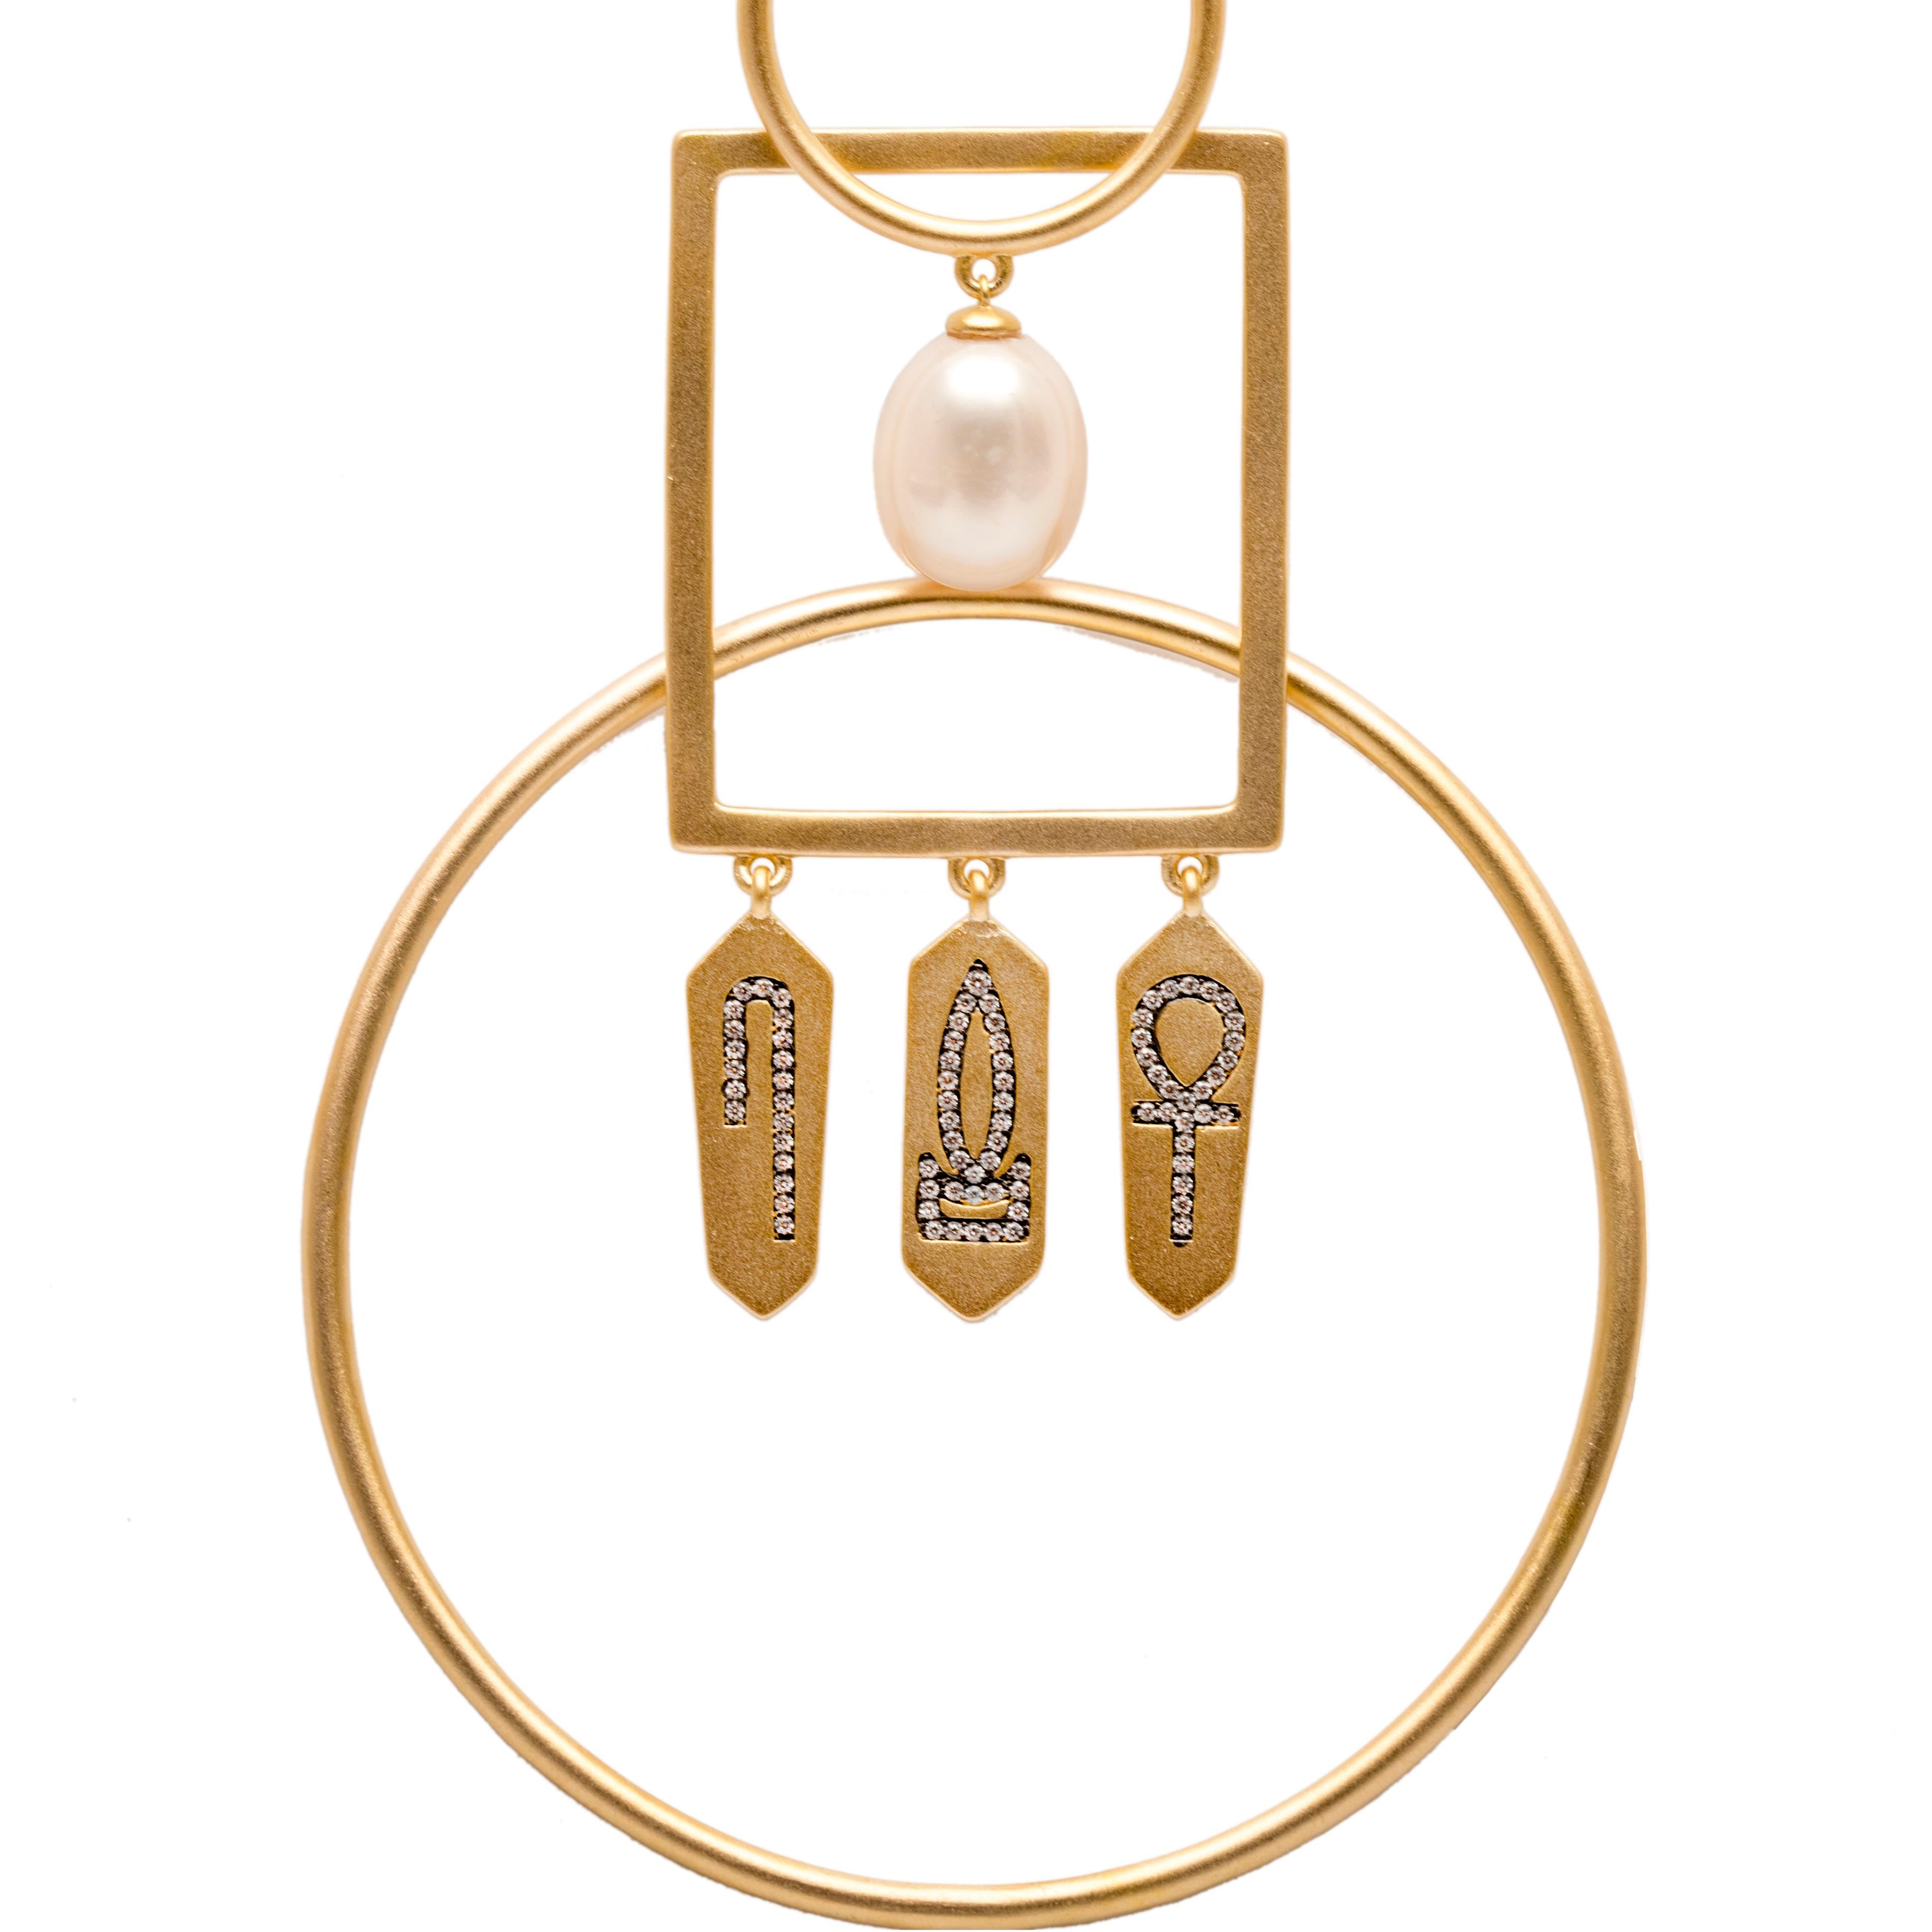 Newest Addition to Ammanii's Malikat = Queens Collections. Hand crafted, interconnected hoop earrings with amulets inscribed with hieroglyphic signs to give you the power of life, health and prosperity. Hand crafted - vermeil gold adorned with green